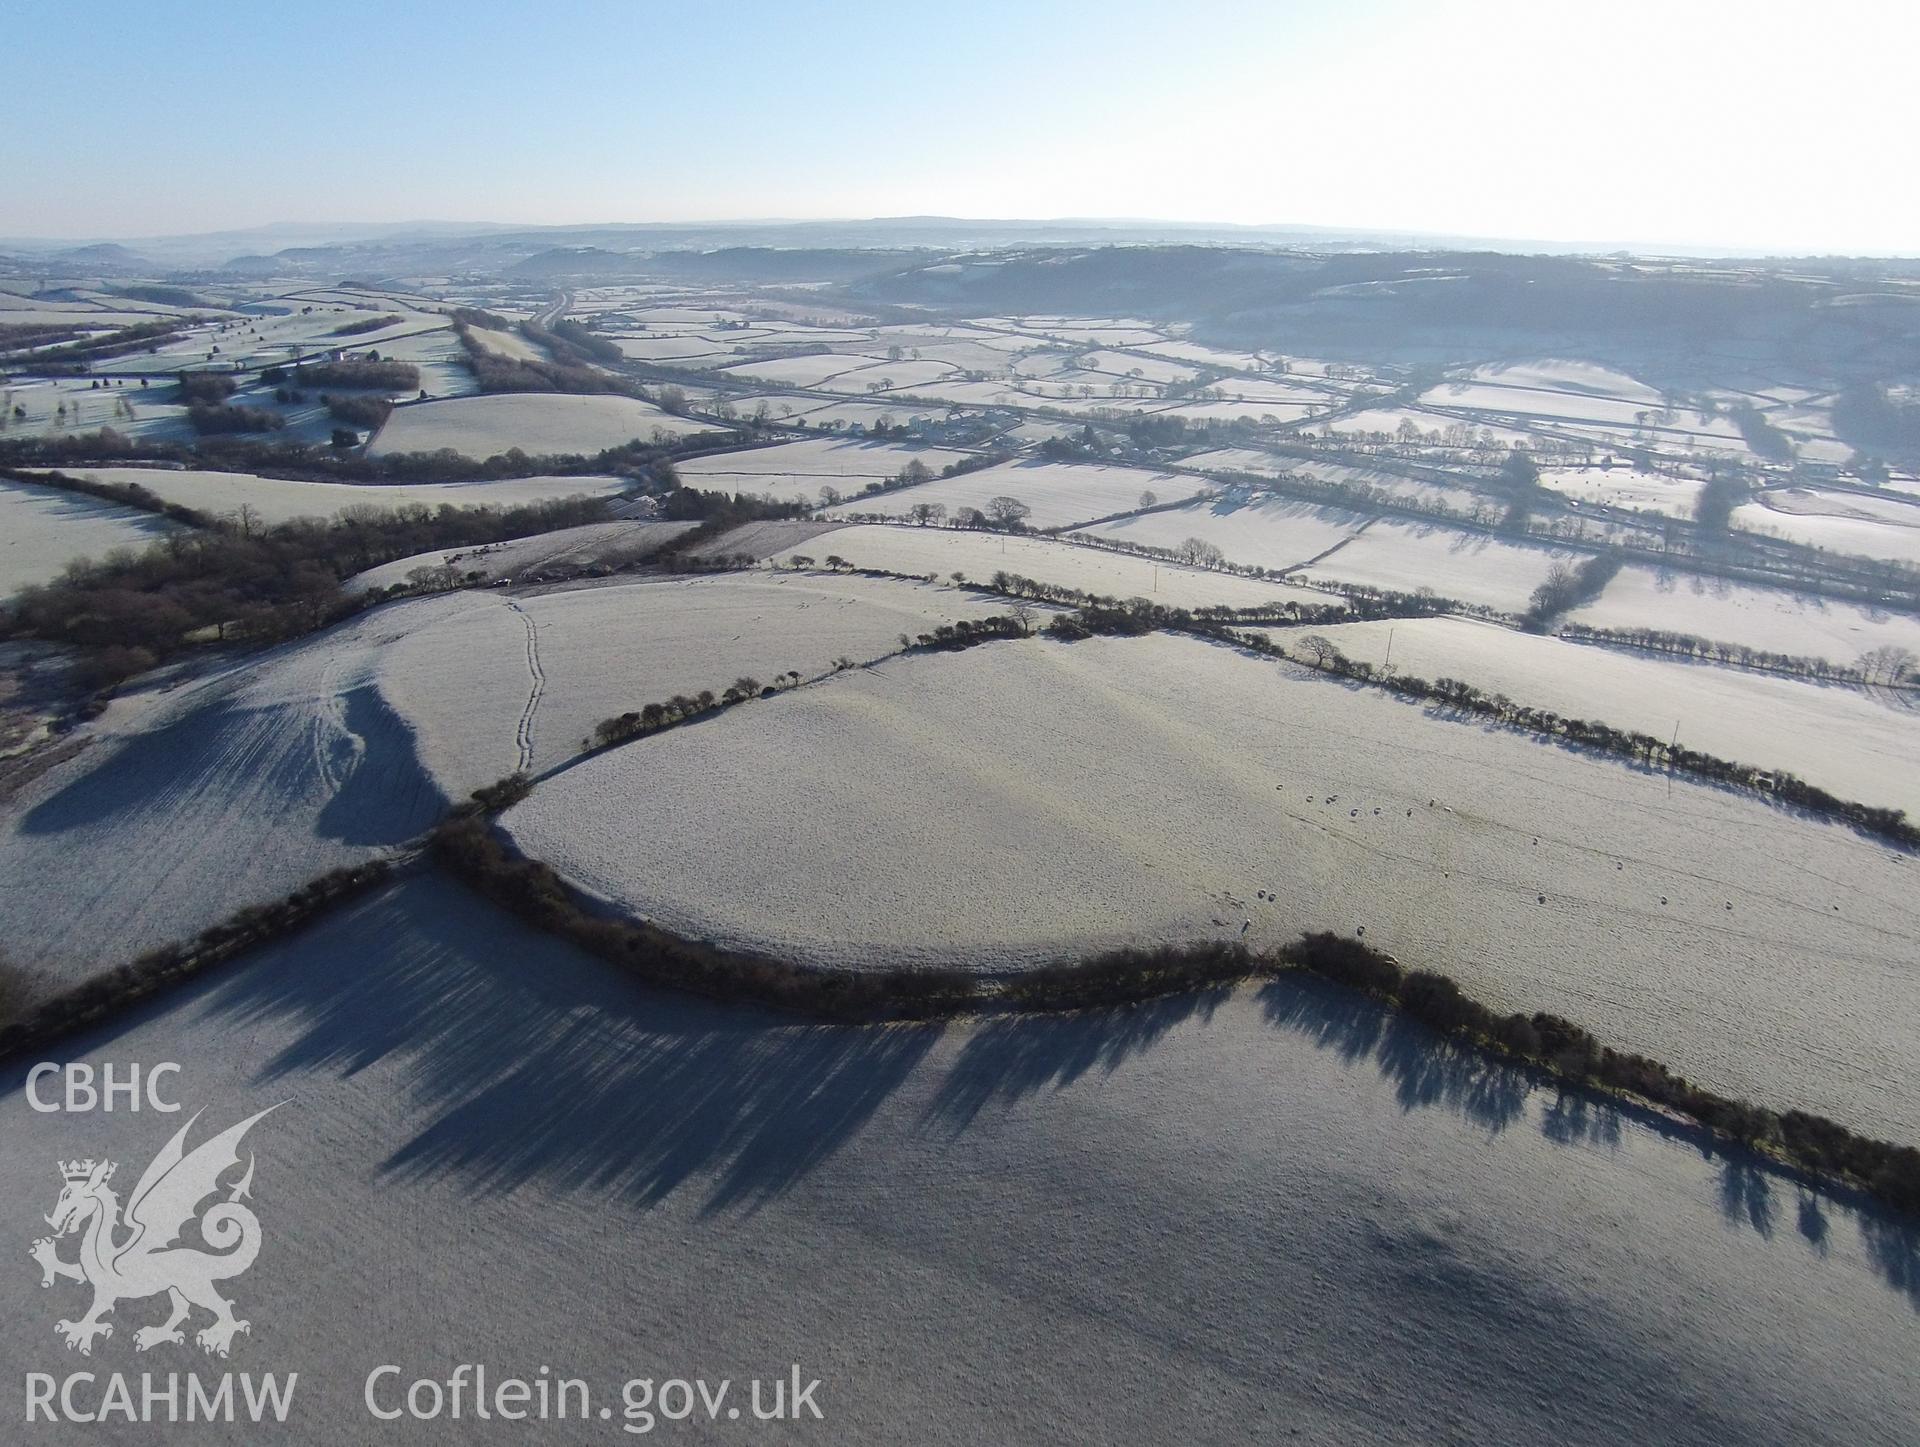 Colour aerial photo showing Castell Y Gaer, taken by Paul R. Davis, 20th January 2016.